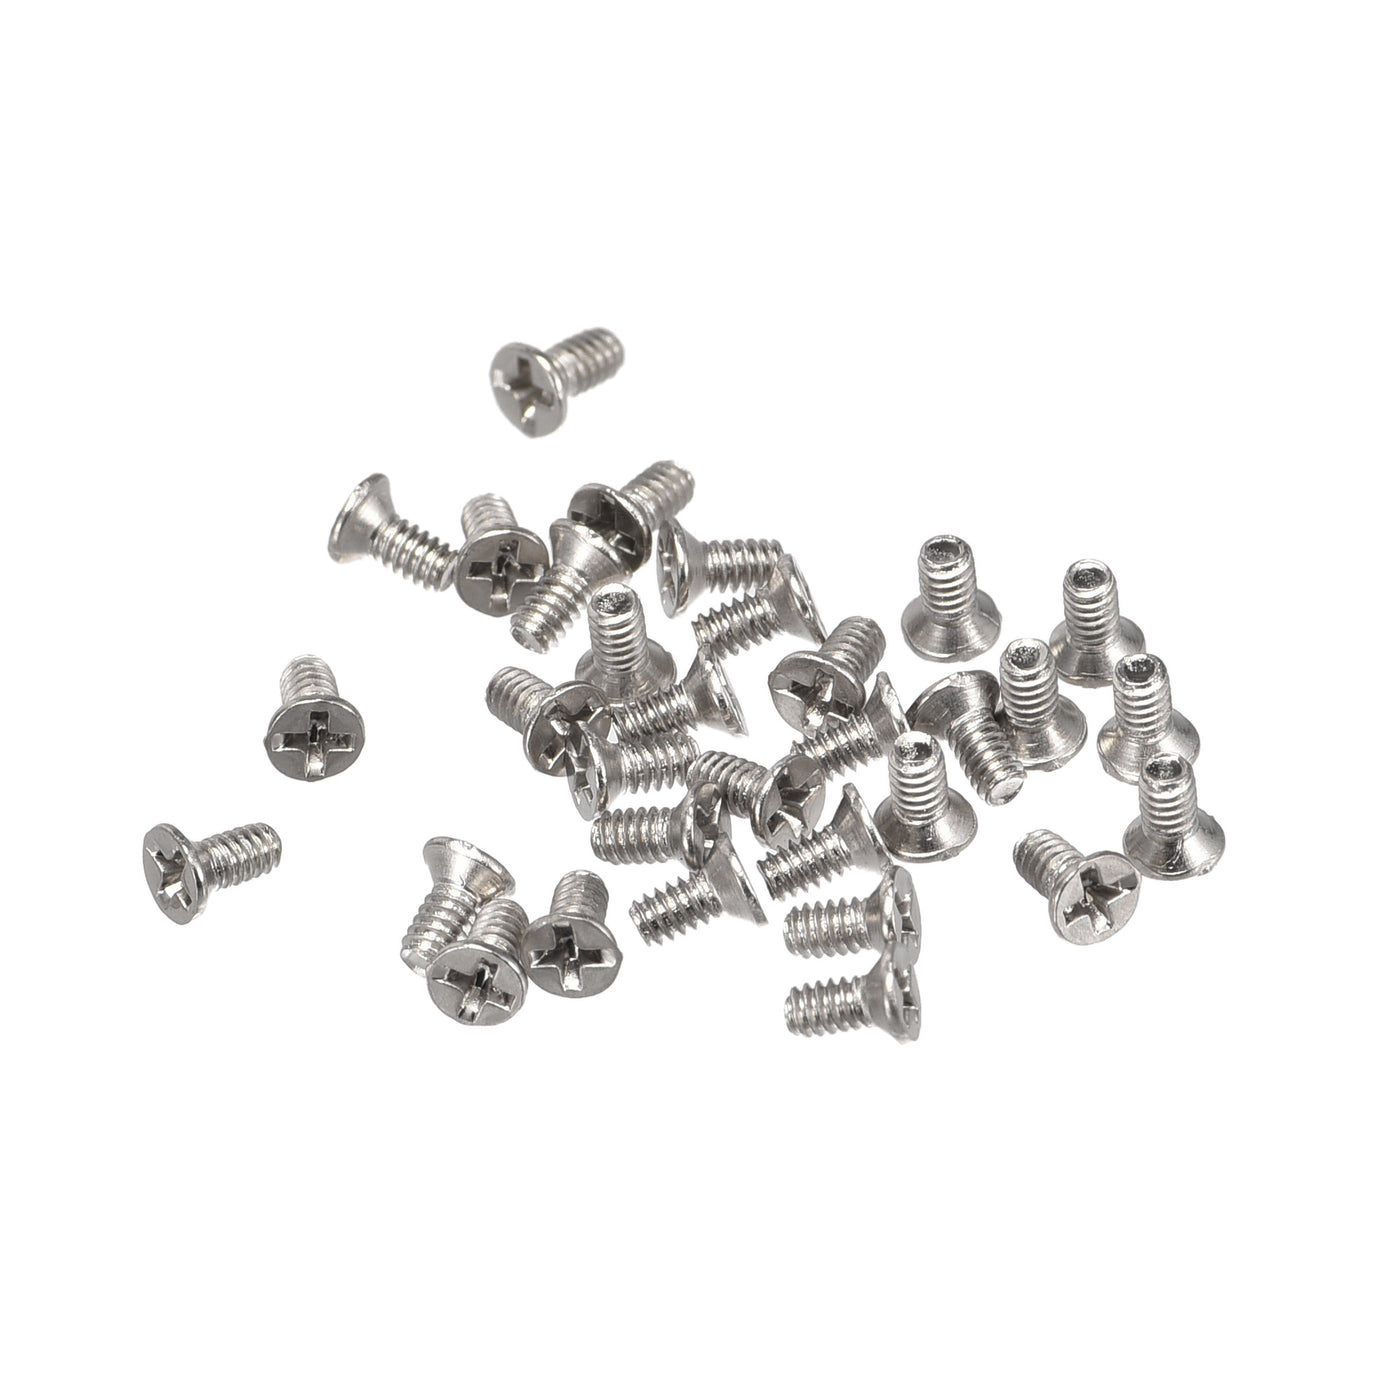 uxcell Uxcell M1.4 x 3mm Tiny Screws Phillips Flat Head Screws Carbon Steel Machine Screws for Glasses Spectacles Watch and Other Small Electronics 150pcs